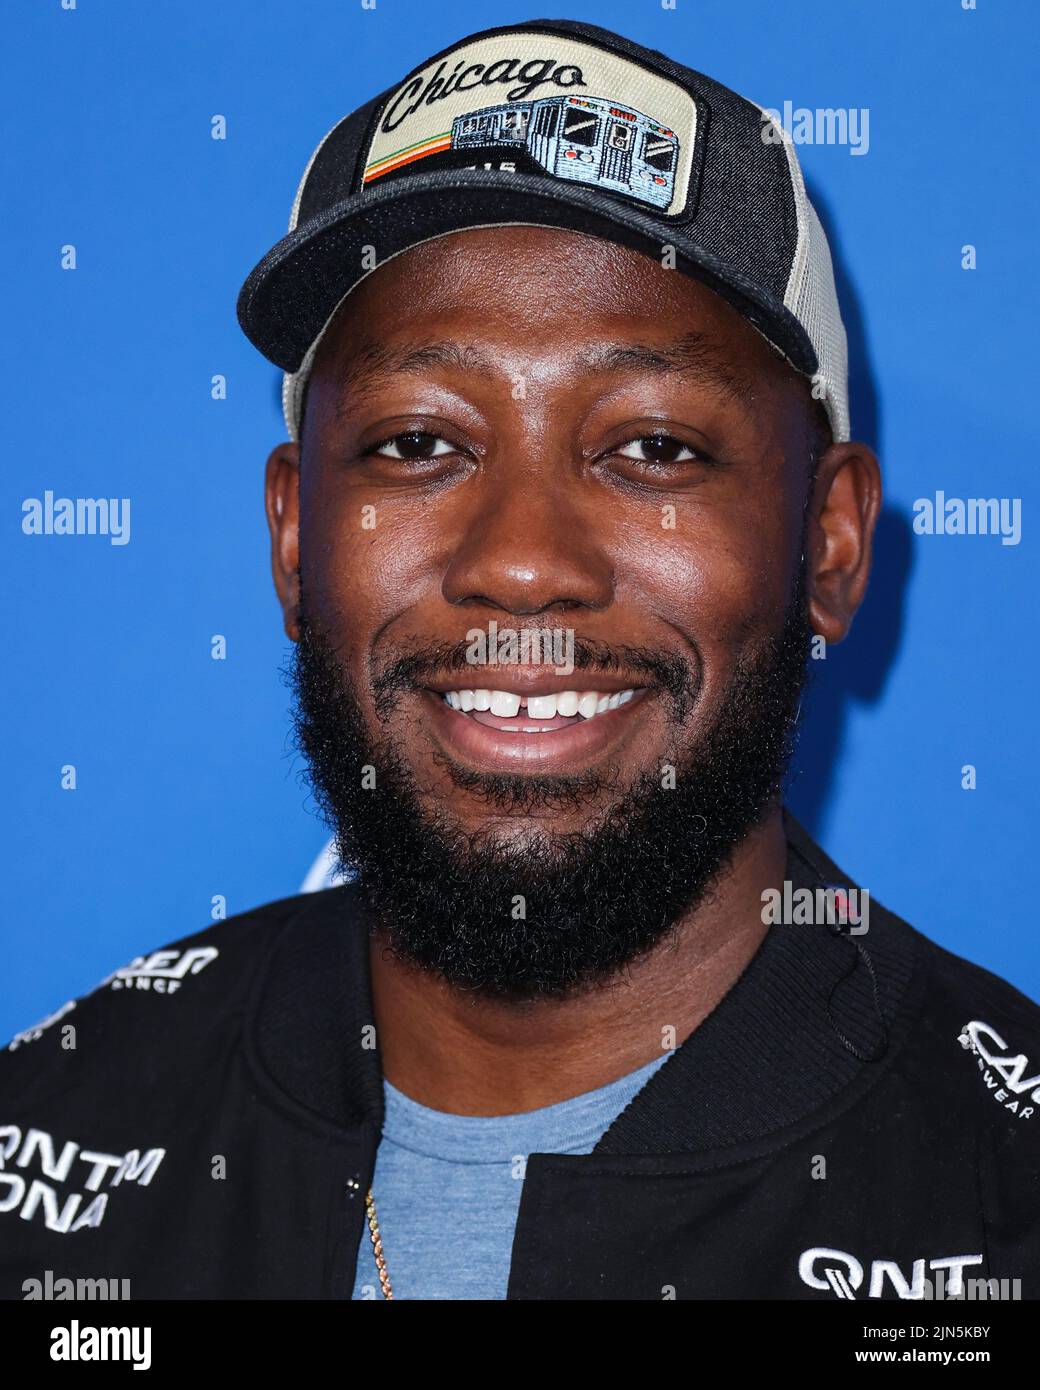 ELYSIAN PARK, LOS ANGELES, CALIFORNIA, USA - AUGUST 08: American actor Lamorne Morris arrives at Kershaw's Challenge Ping Pong 4 Purpose 2022 held at Dodger Stadium on August 8, 2022 in Elysian Park, Los Angeles, California, United States. (Photo by Xavier Collin/Image Press Agency) Stock Photo